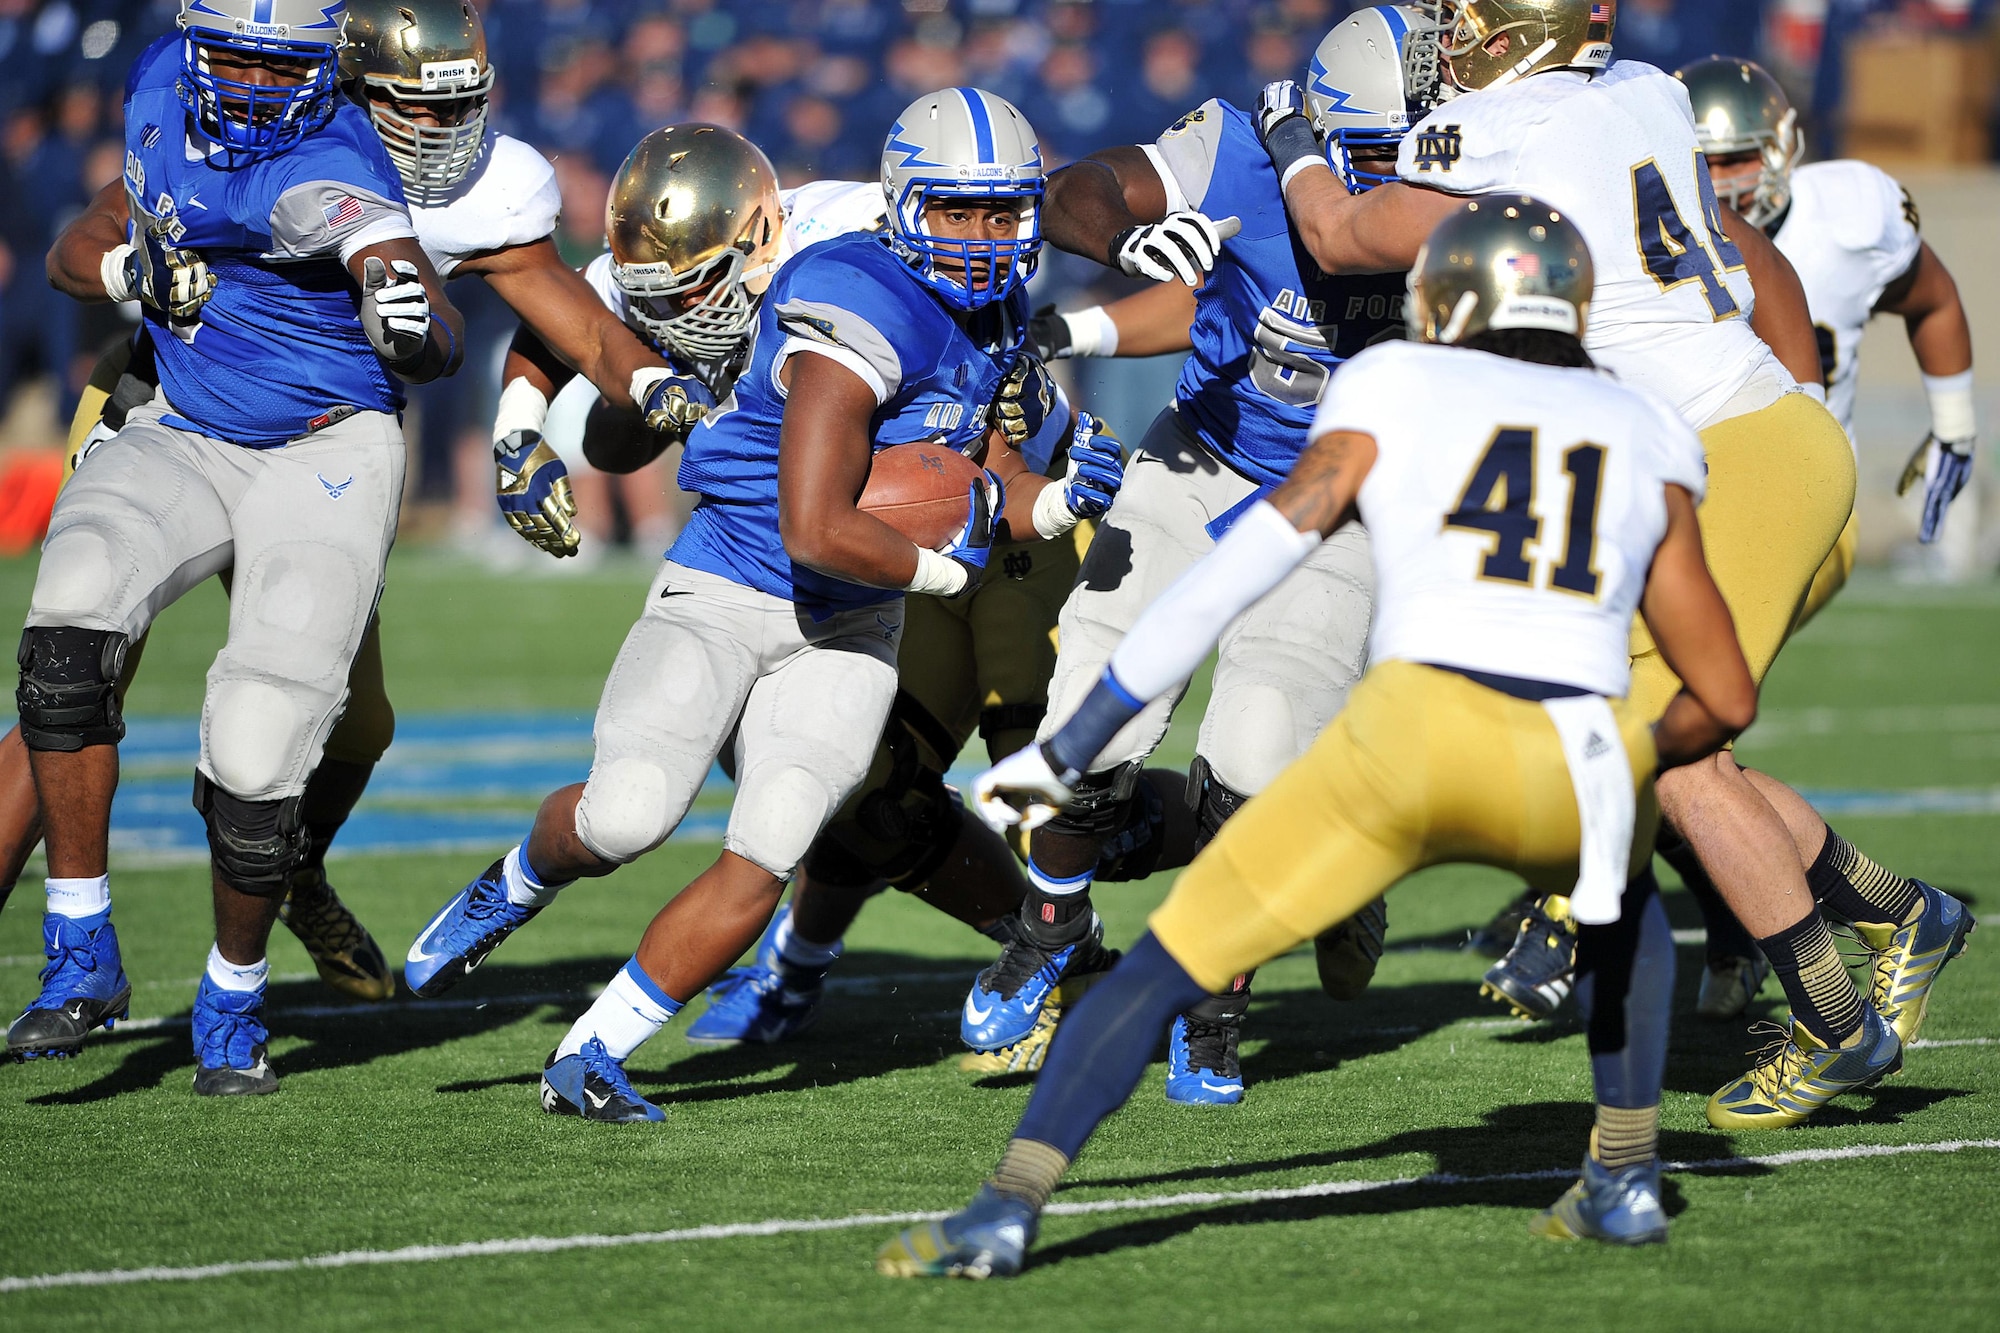 Air Force junior running back Broam Hart rushes the ball for 9 yards during the second quarter of the Air Force-Notre Dame Oct. 26, 2013, at Falcon Stadium in Colorado Springs, Colo. The Falcons fell to the Fighting Irish, 45-10. 